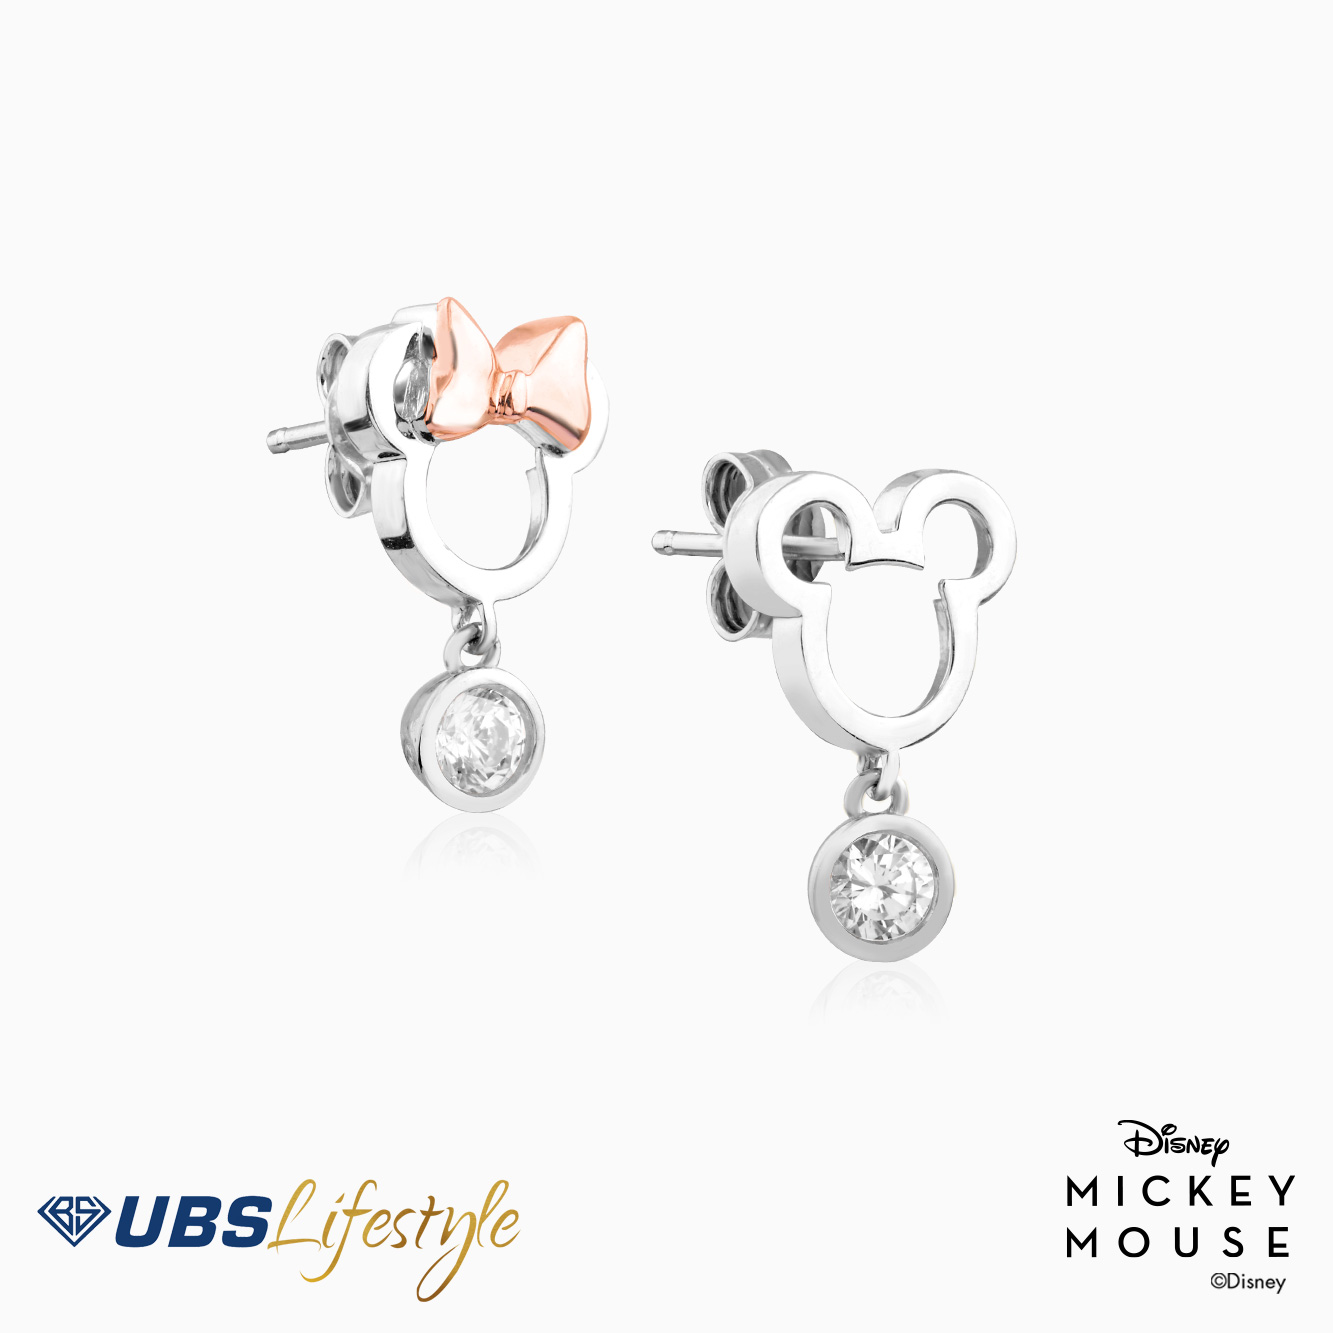 UBS Anting Emas Disney Mickey & Minnie Mouse - Cwy0021 - 17K